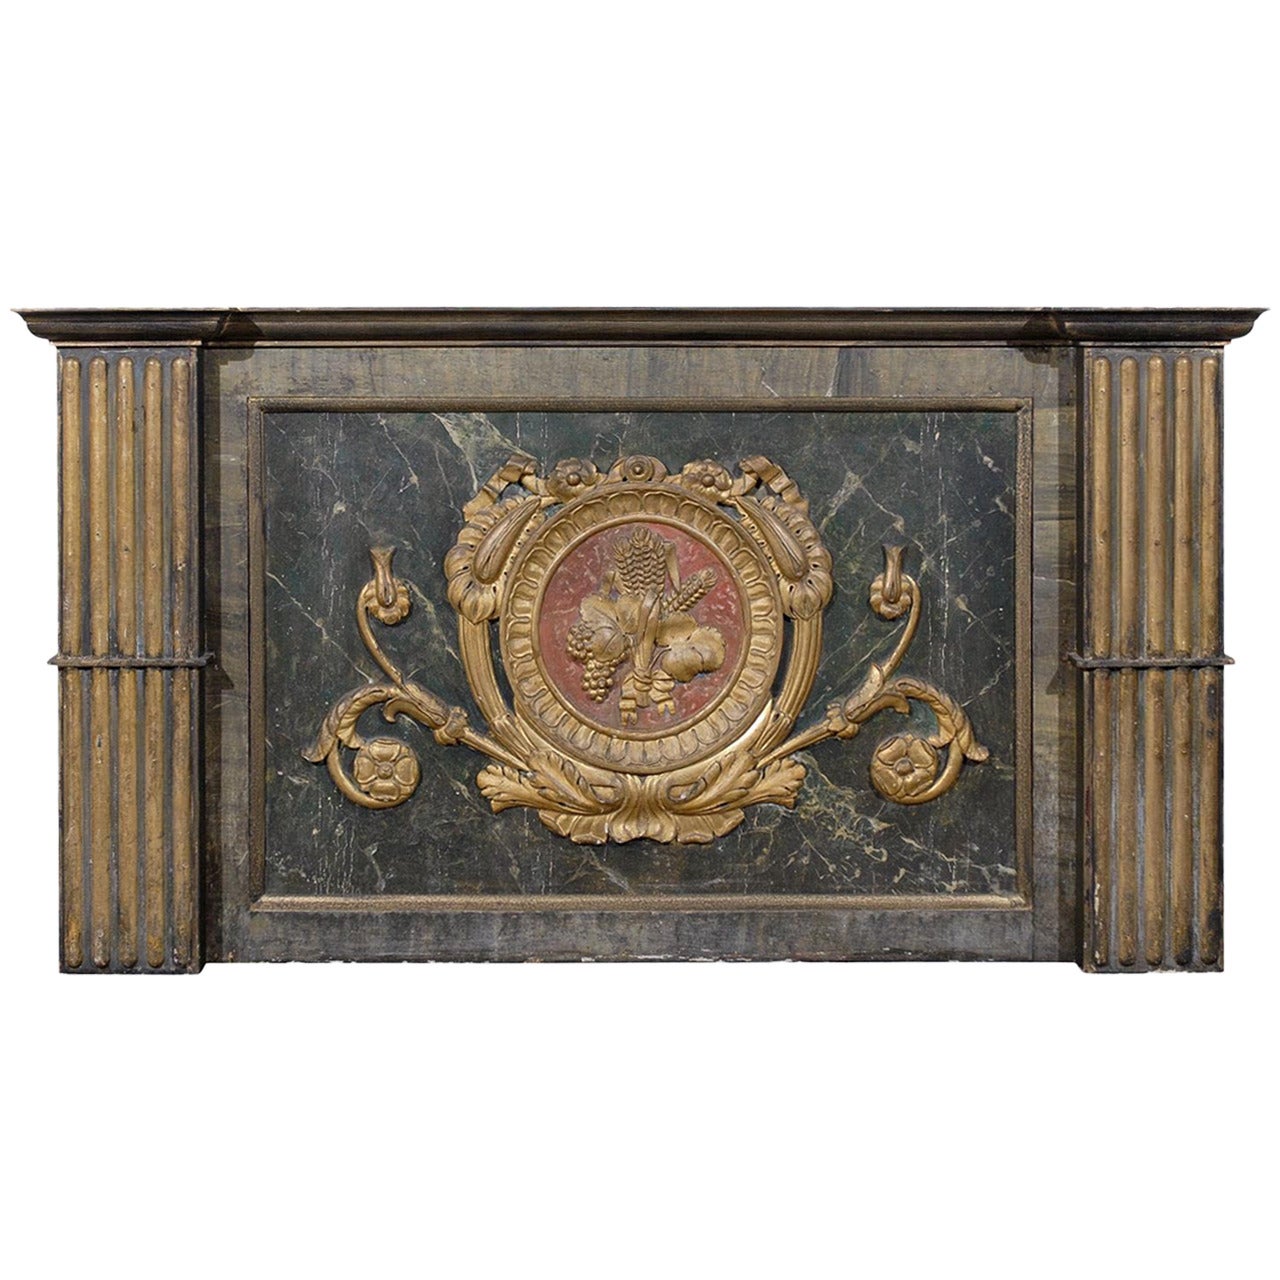 Early 19th Century Italian Panel with Flat Side Pilasters